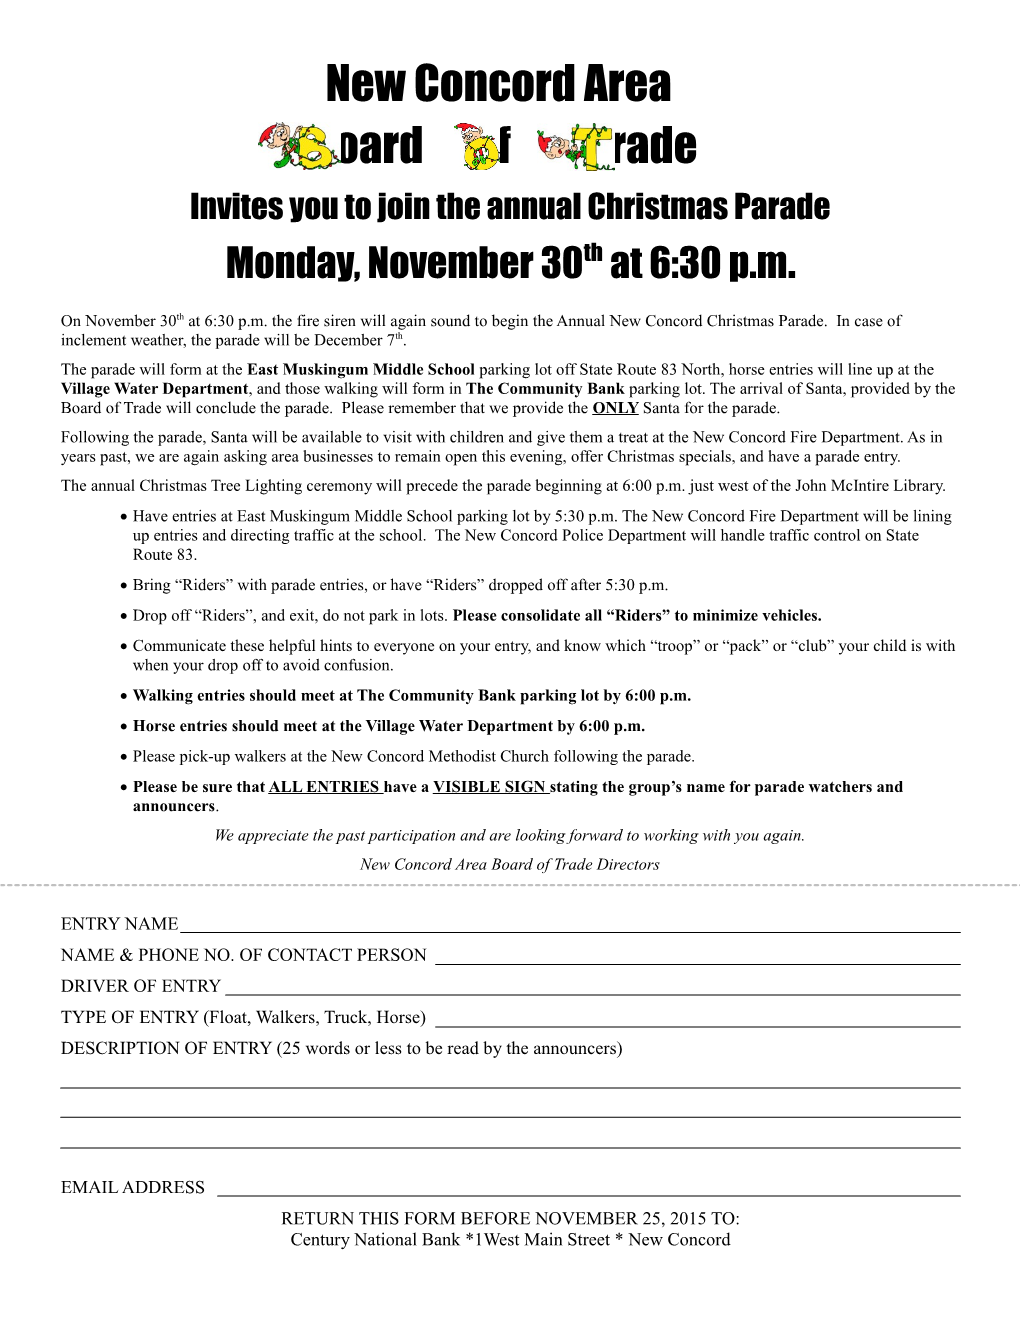 The Parade Will Form at the East Muskingum Middle School Parking Lot Off State Route 83